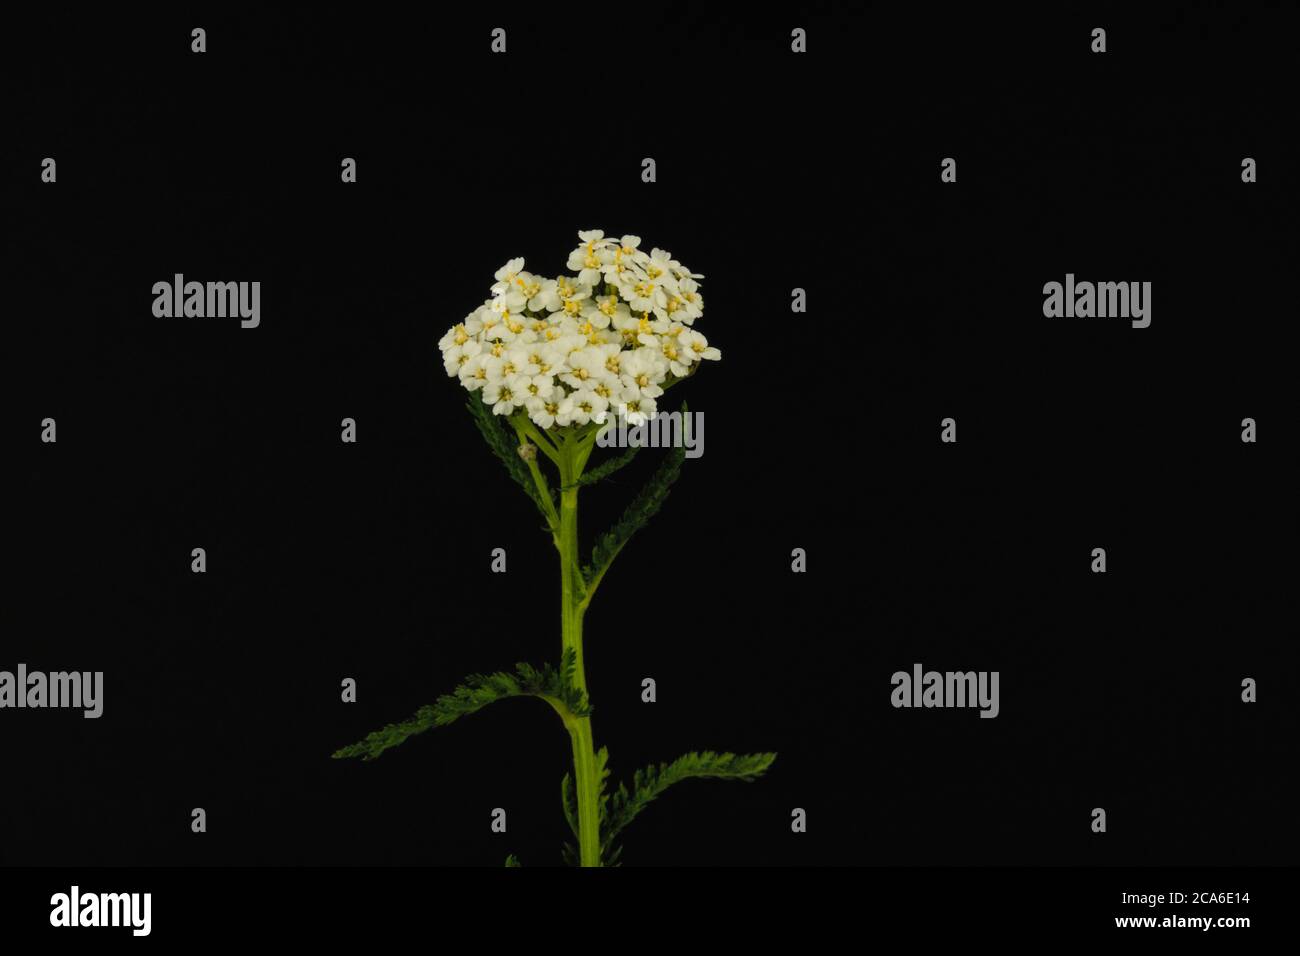 Close-up of a wild flower known as common yarrow on a black background, scientific name Achillea millefolium Stock Photo